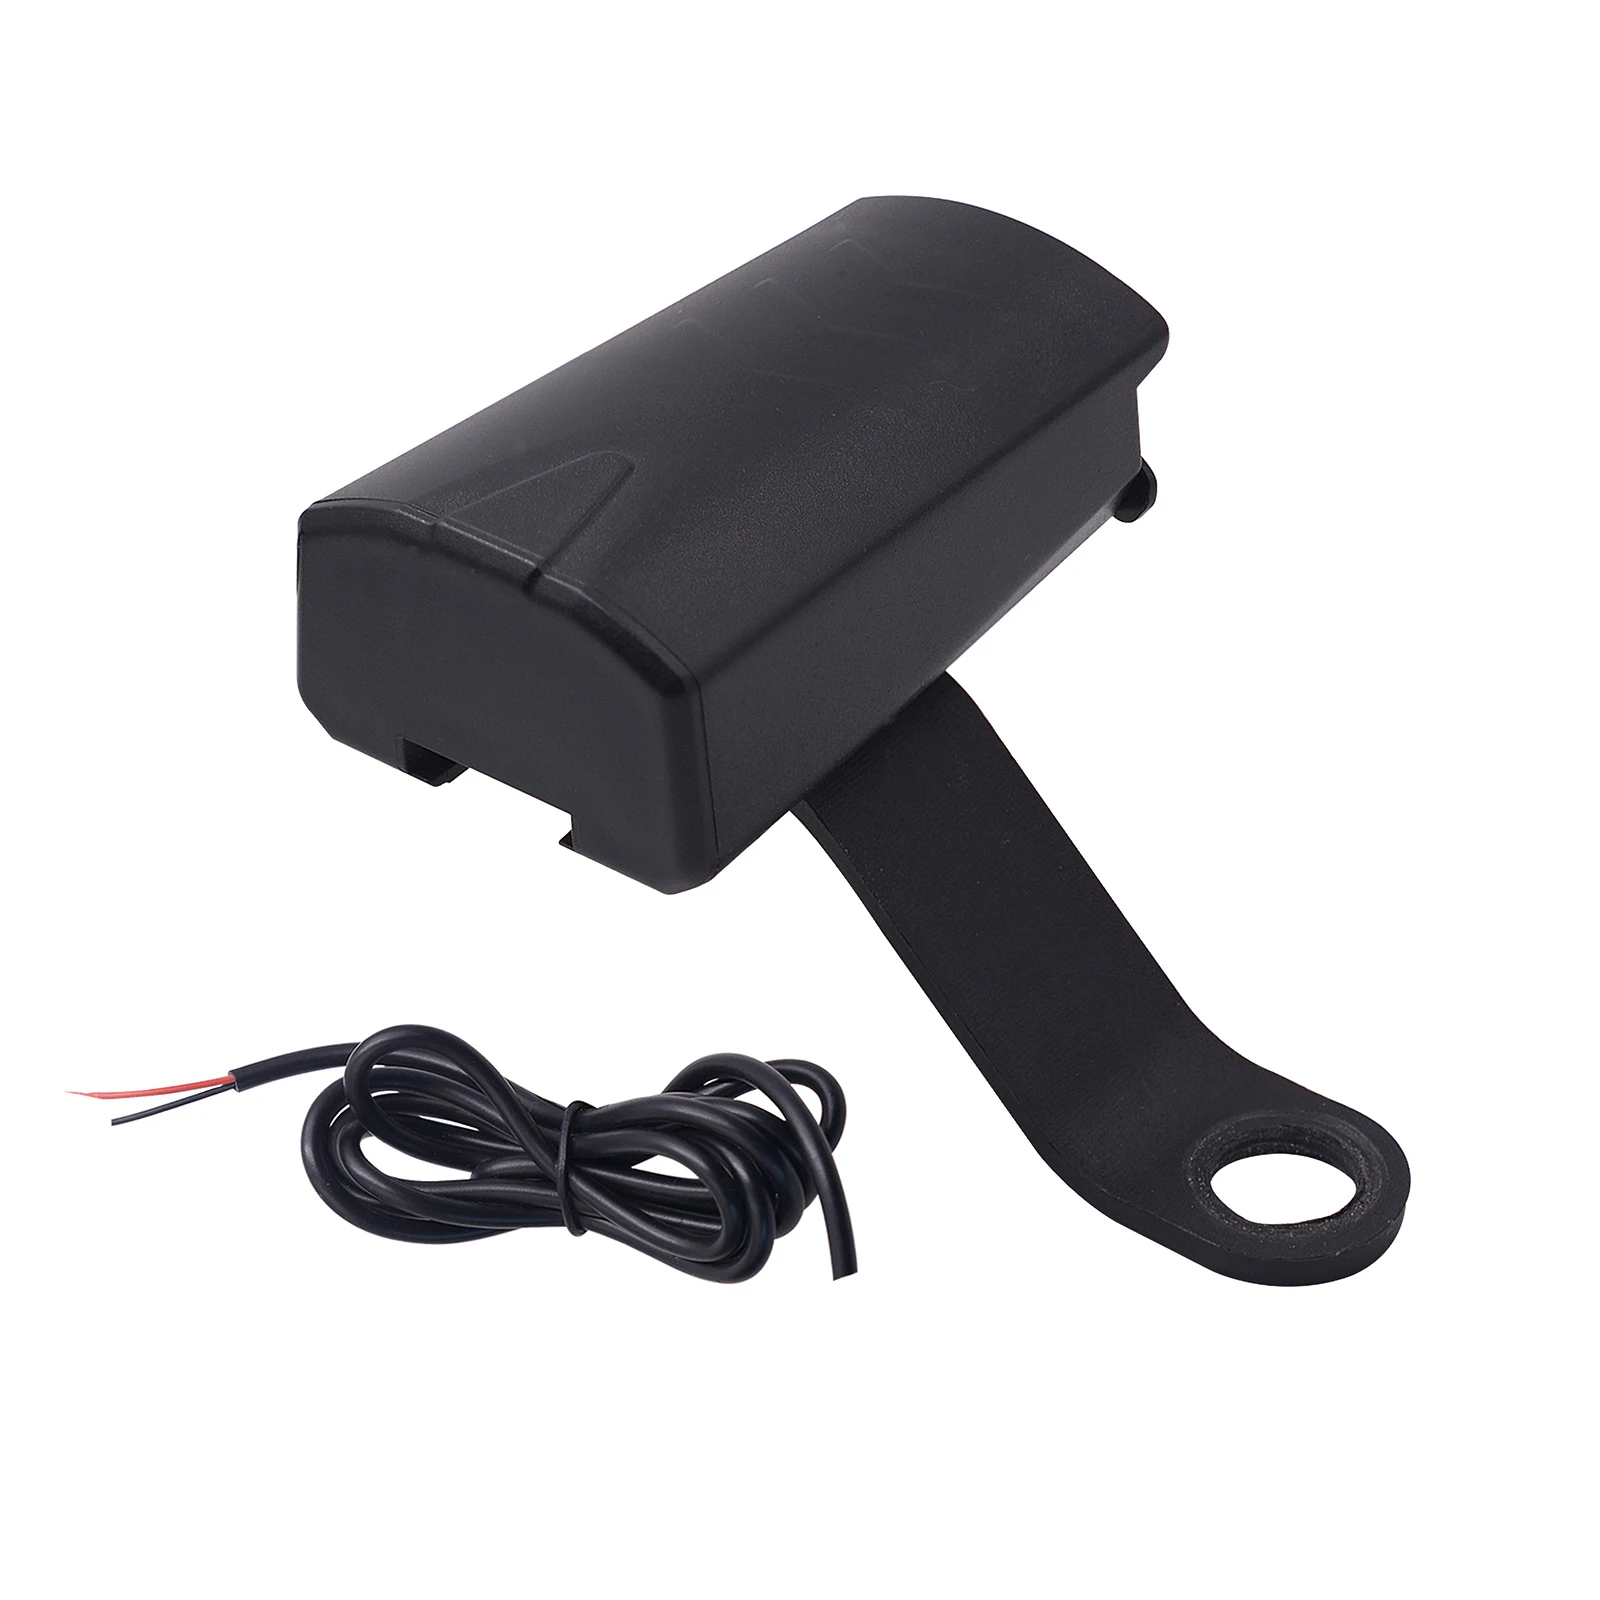 

5V/1.2A USB Motorbike Phone Charger with Indicator Light Rearview Mirror Charge Supply Socket for 12V Motorcycle ATV Snowmobile